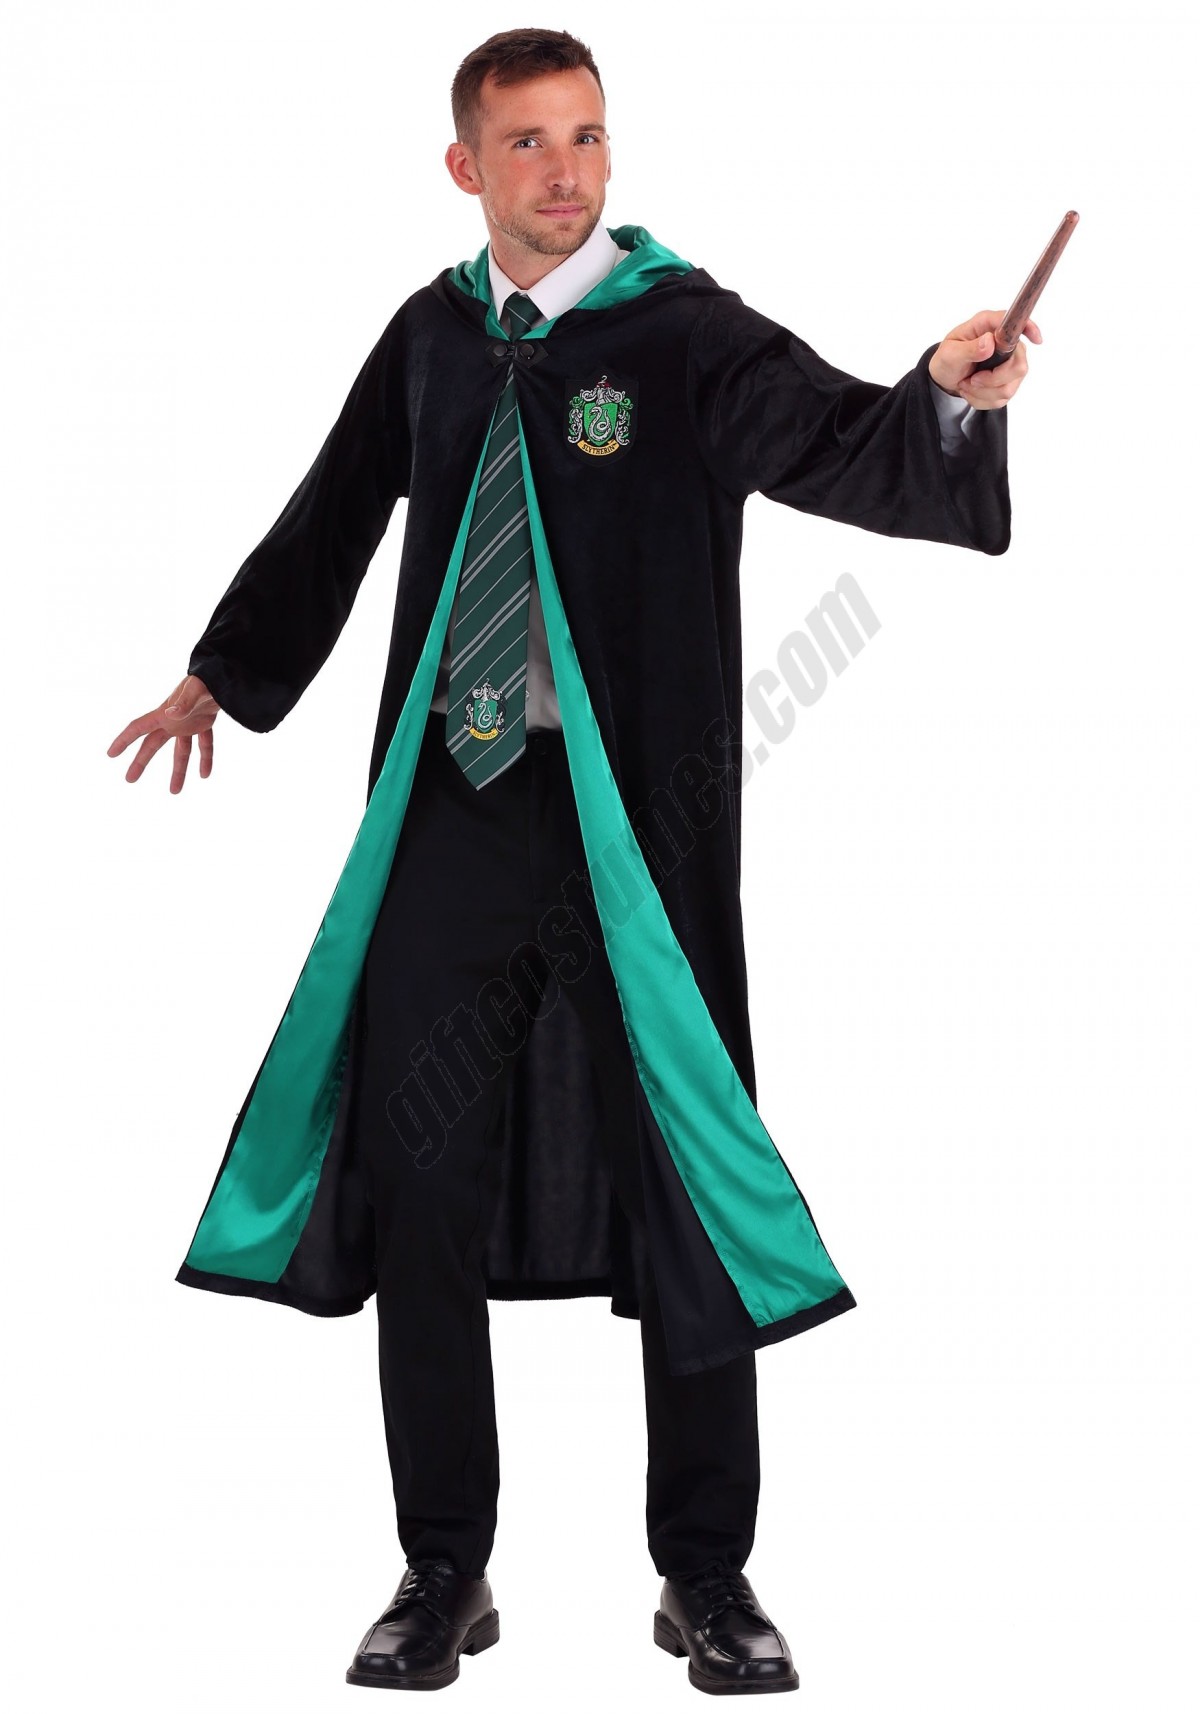 Harry Potter Deluxe Slytherin Robe Costume for Adults - Men's - -0